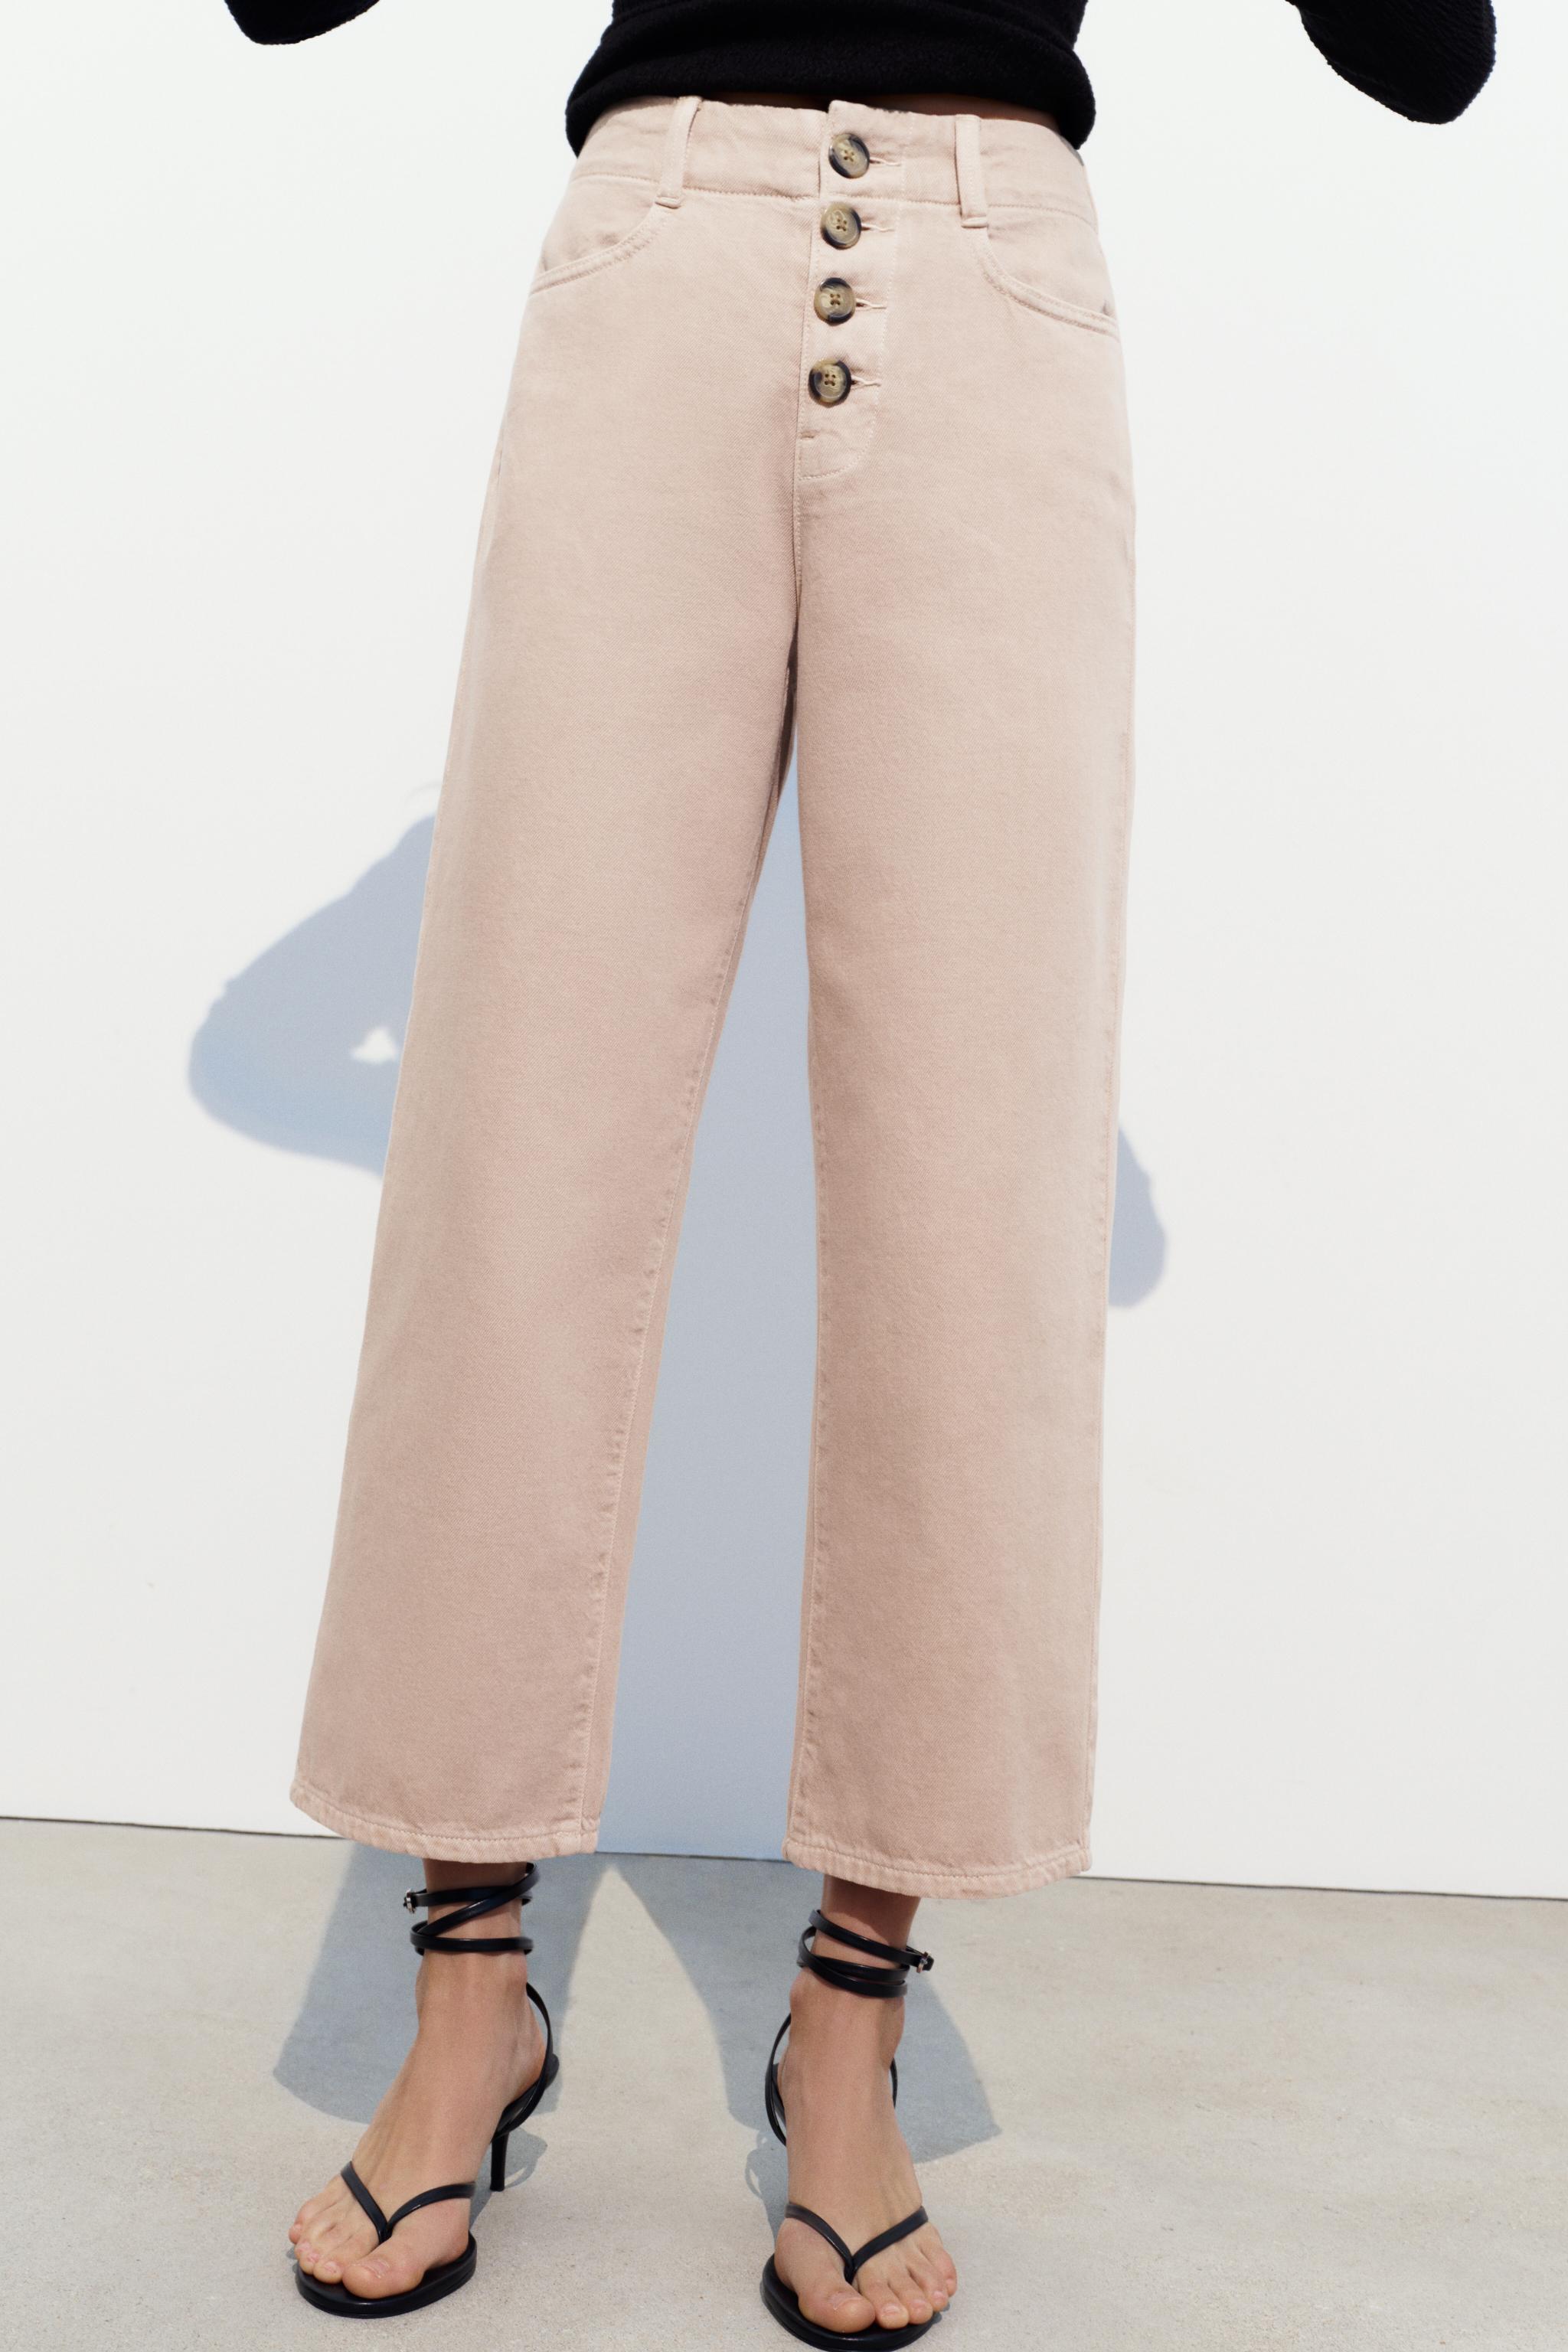 Women's Pink Jeans, Explore our New Arrivals